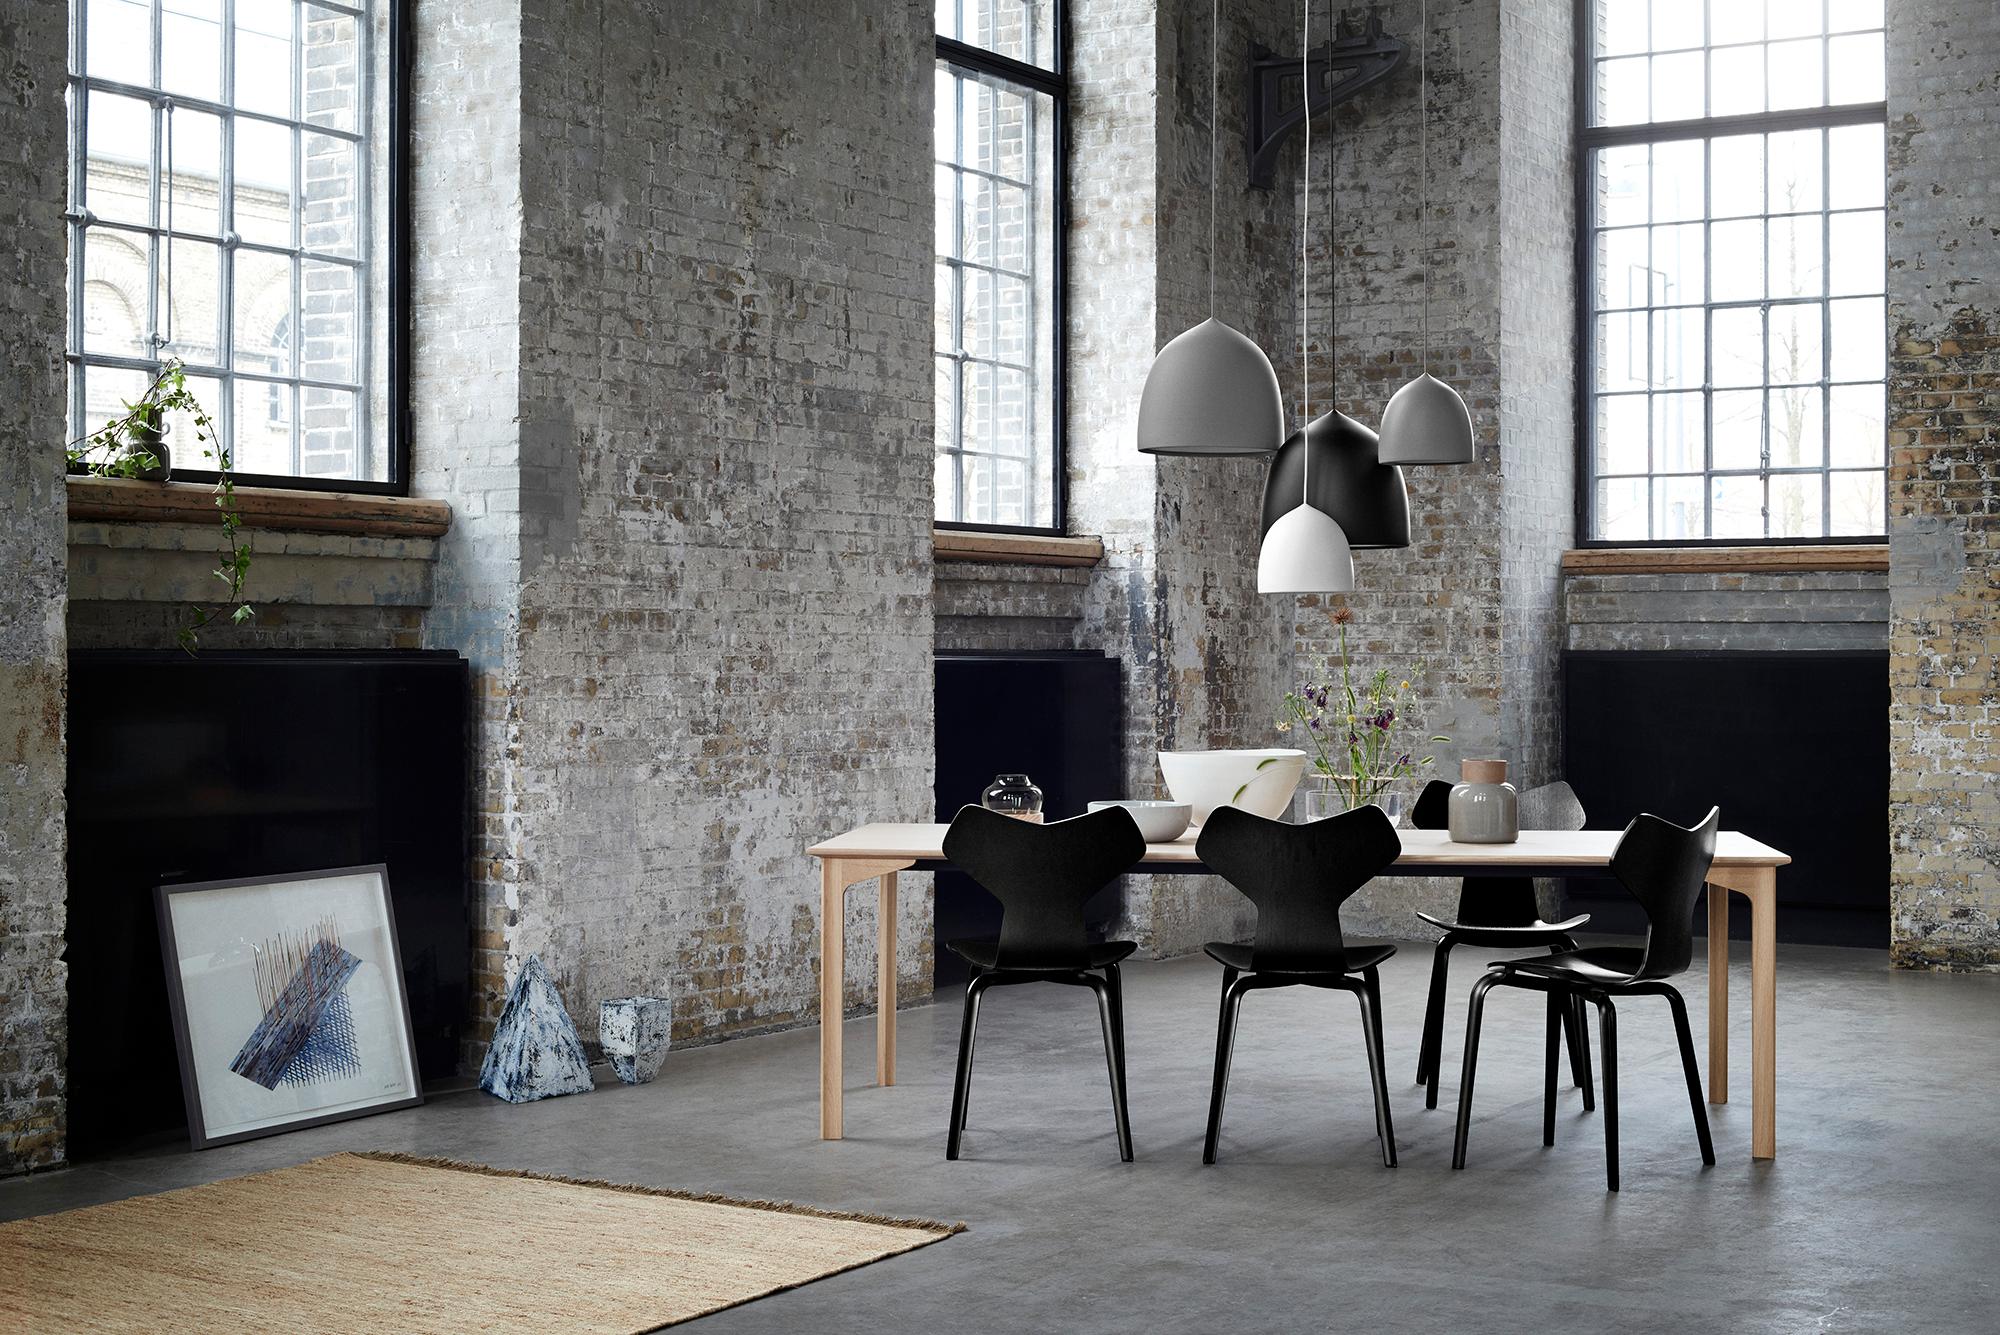 GamFratesi 'Suspence P1' Pendant Lamp for Fritz Hansen in Black.

Established in 1872, Fritz Hansen has become synonymous with legendary Danish design. Combining timeless craftsmanship with an emphasis on sustainability, the brand’s re-editions of